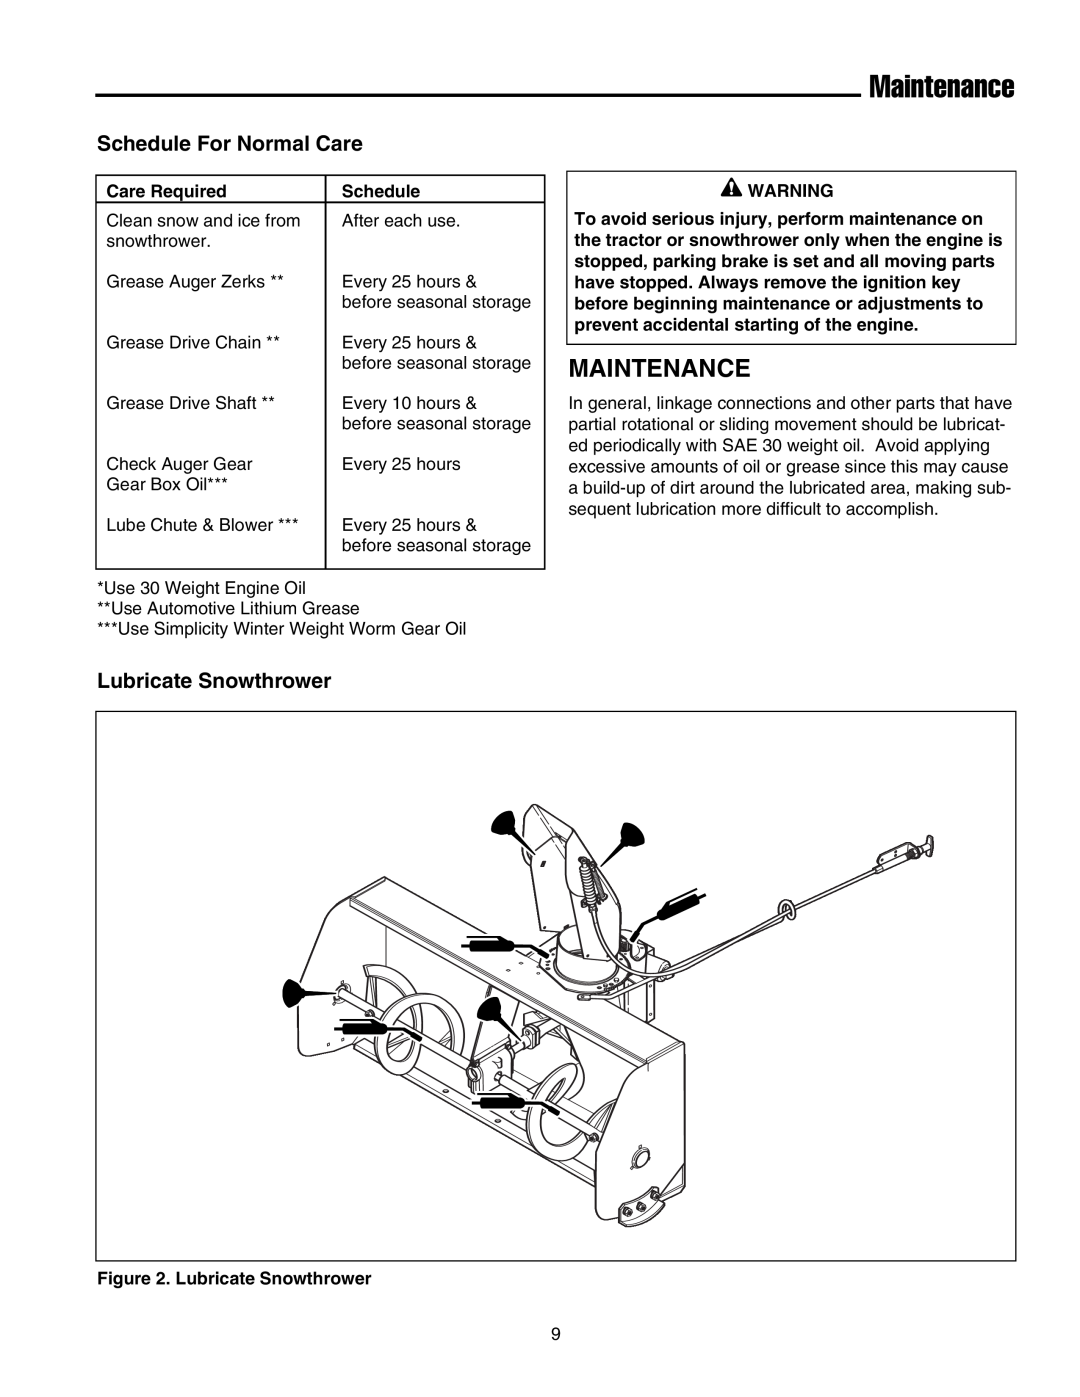 Massey Ferguson L&G 1694404 manual Maintenance, Schedule For Normal Care, Lubricate Snowthrower, Care Required 